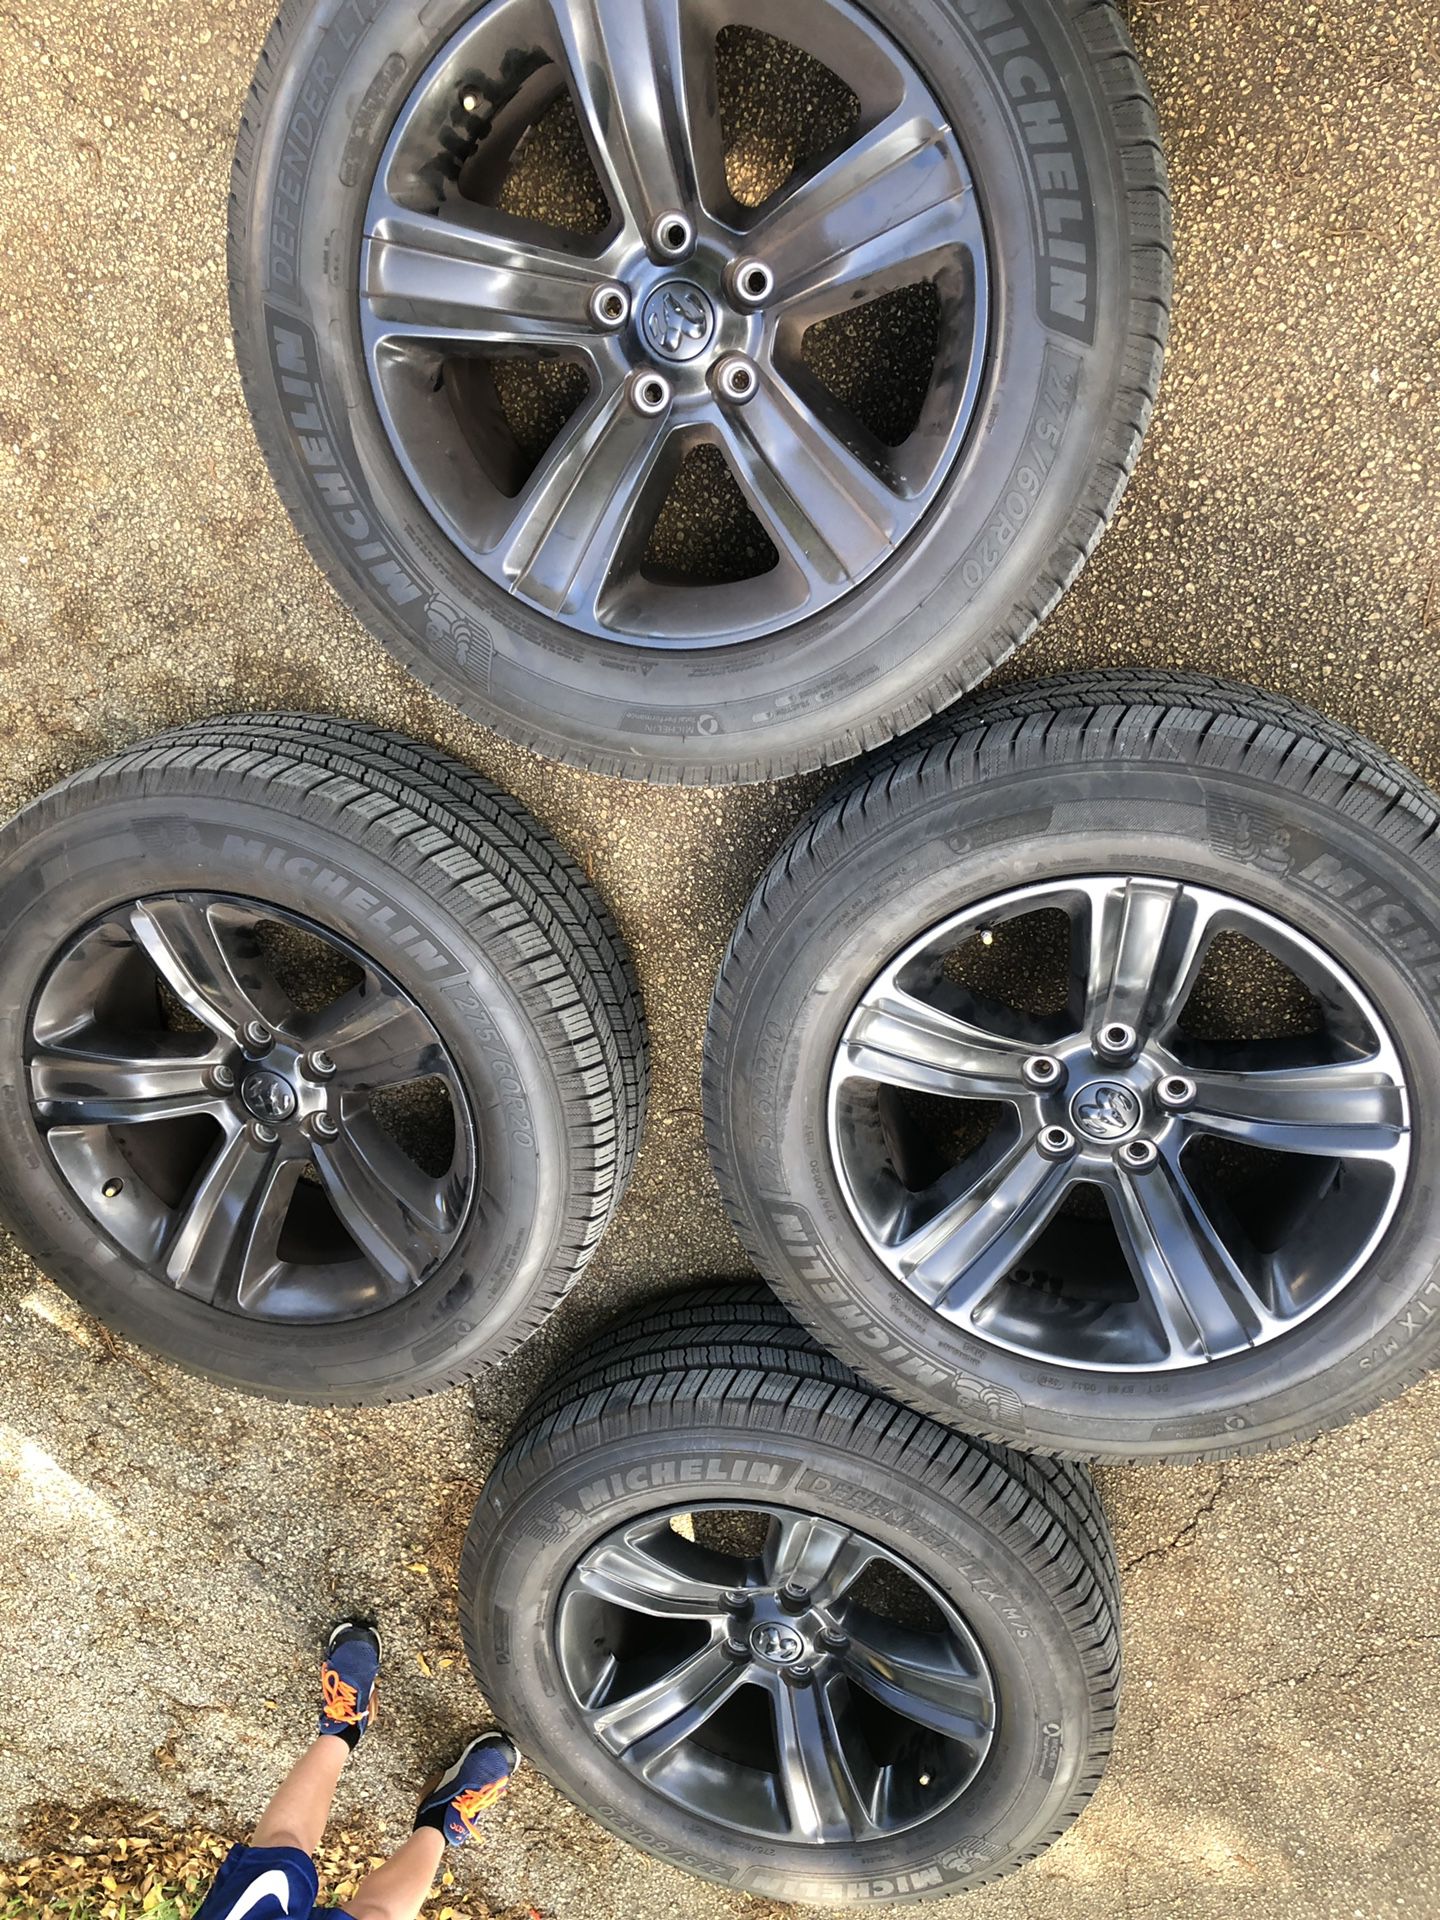 Ram OEM wheels and tires almost new